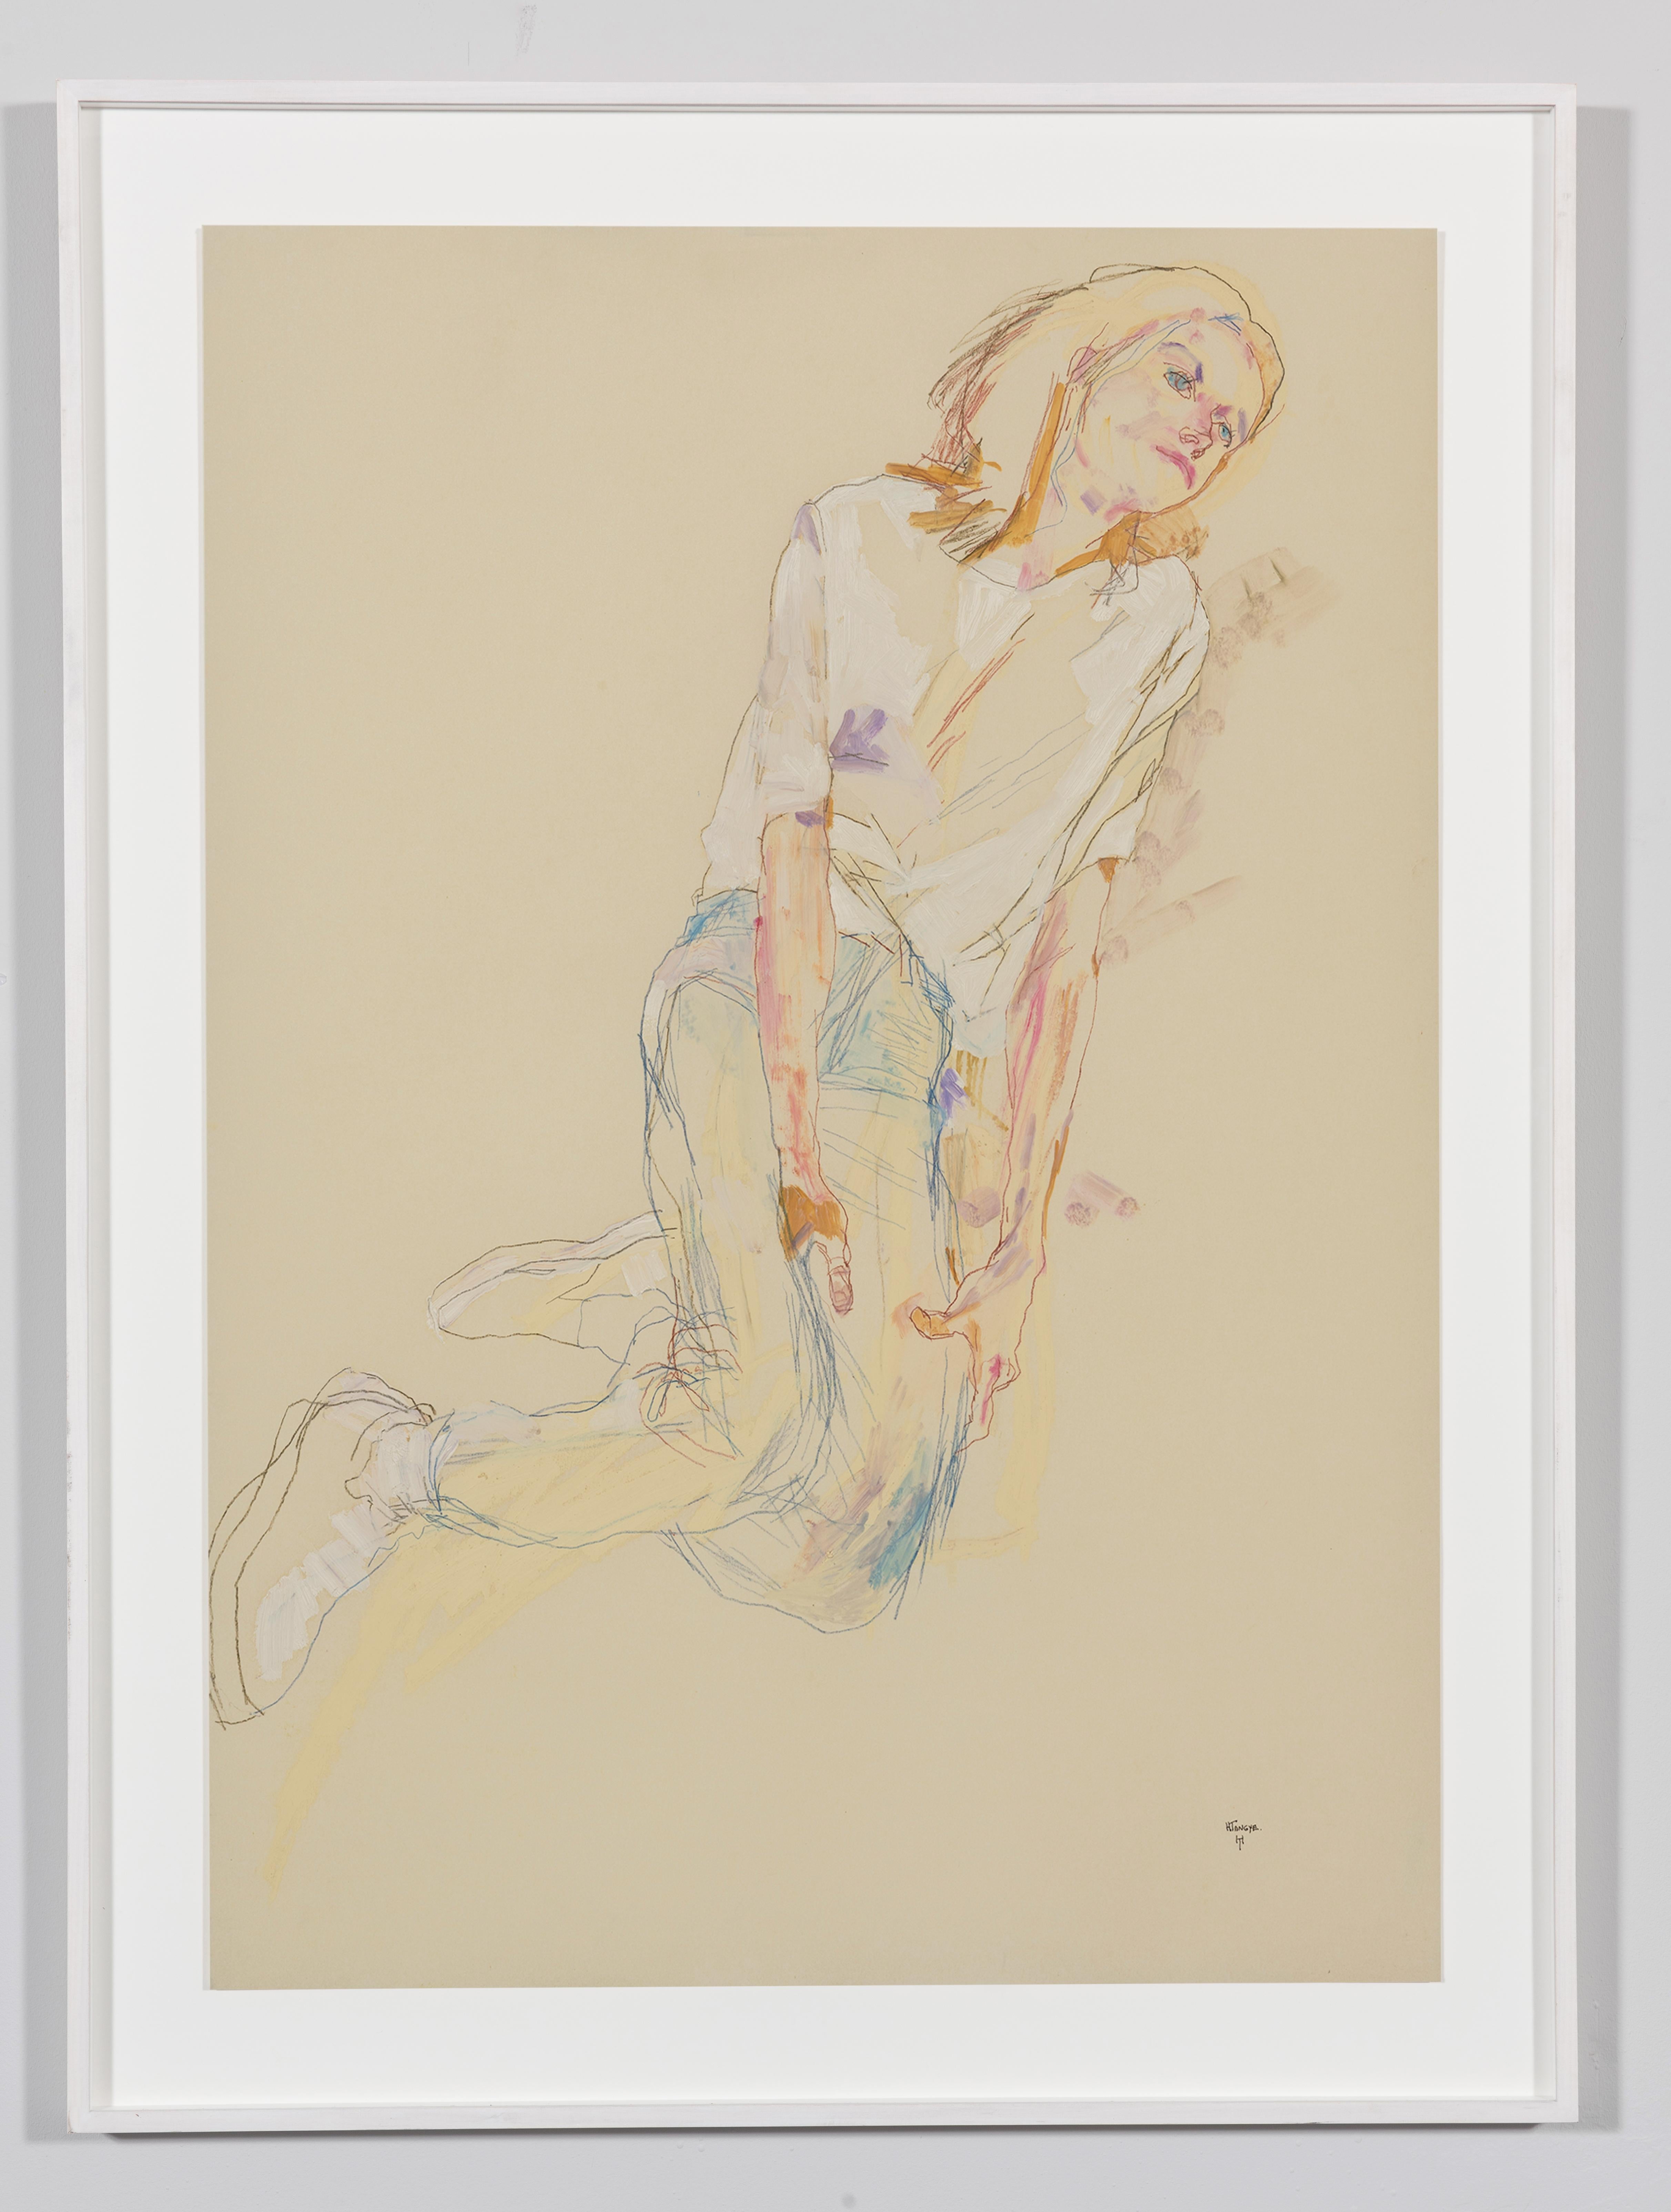 Sarah B. (Reclining, Hands on Thighs), Mixed media on Rives paper - Painting by Howard Tangye